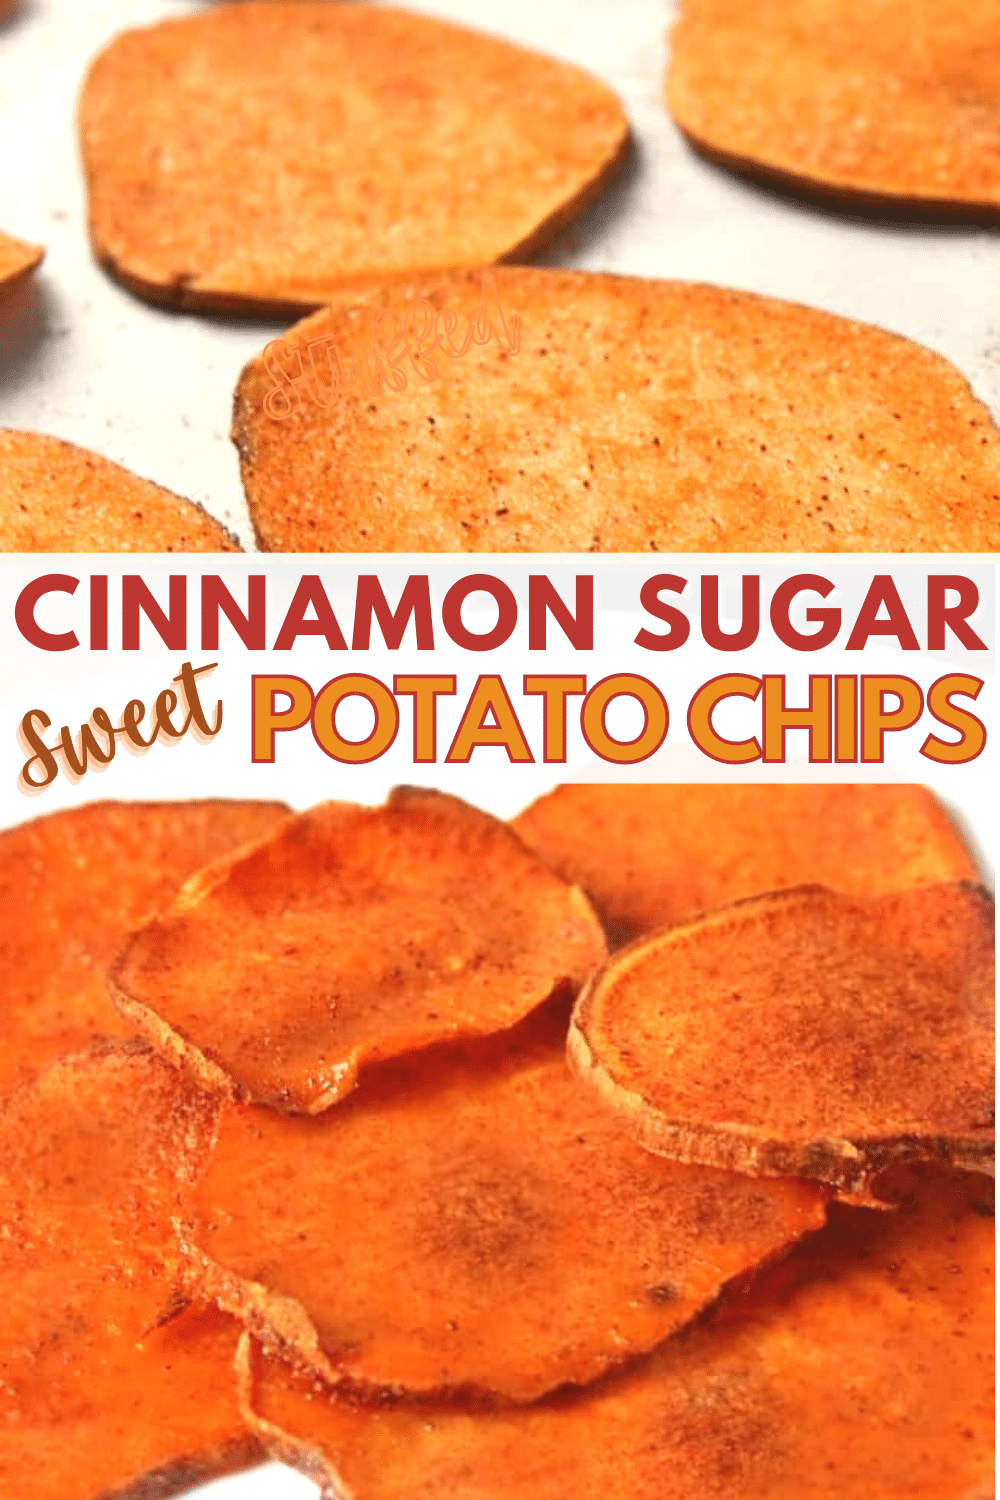 Looking for a guilt-free, delicious snack? These Cinnamon Sugar Sweet Potato Chips are perfect! #healthy #healthyeating #sweetpotatochips via @wondermomwannab